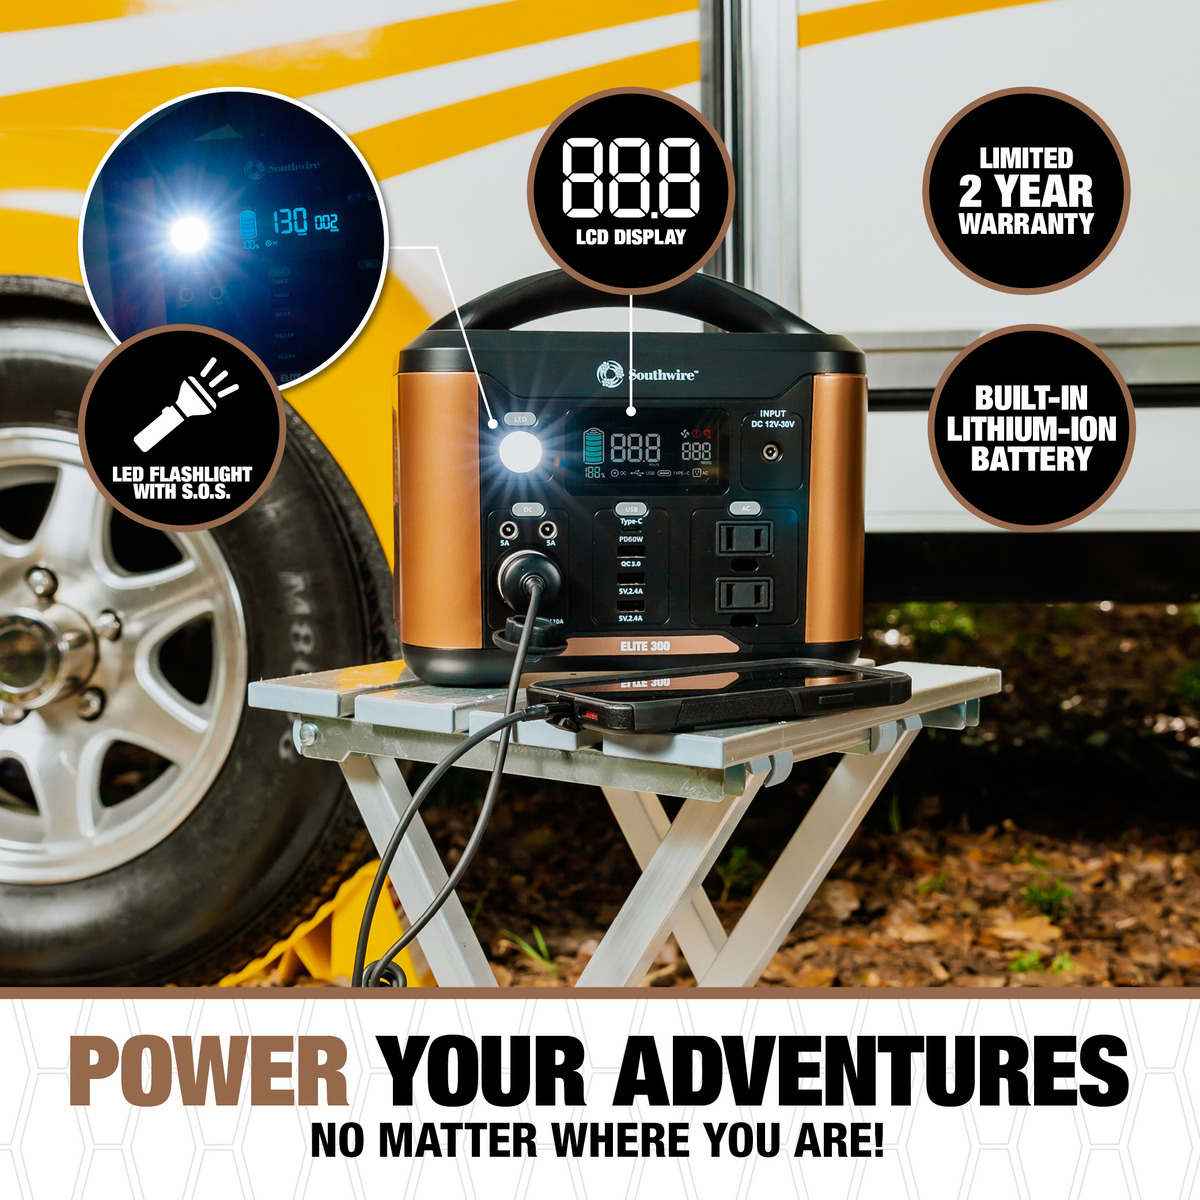 Southwire Elite 300 Series™ Portable Power Station